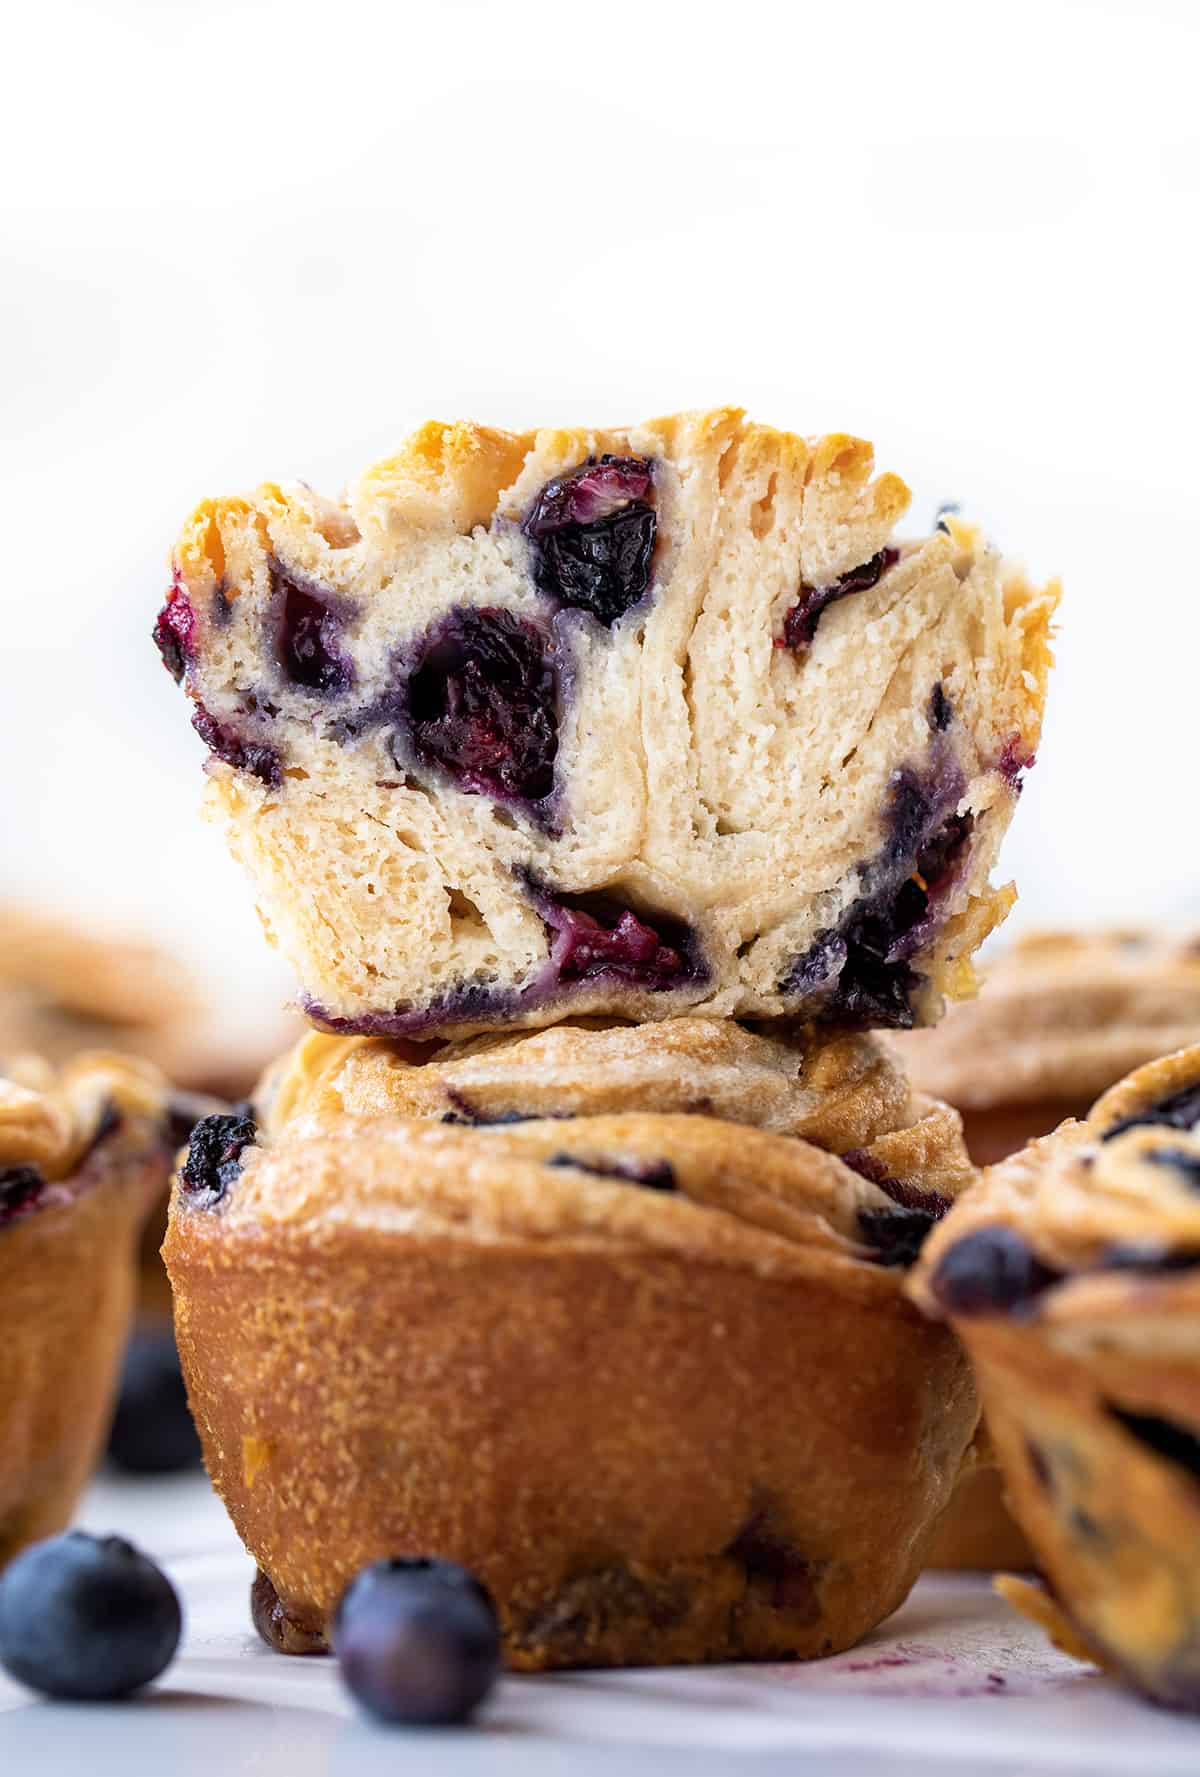 Blueberry Cruffins Stacked and One Cut in Half Showing Inside Texture.